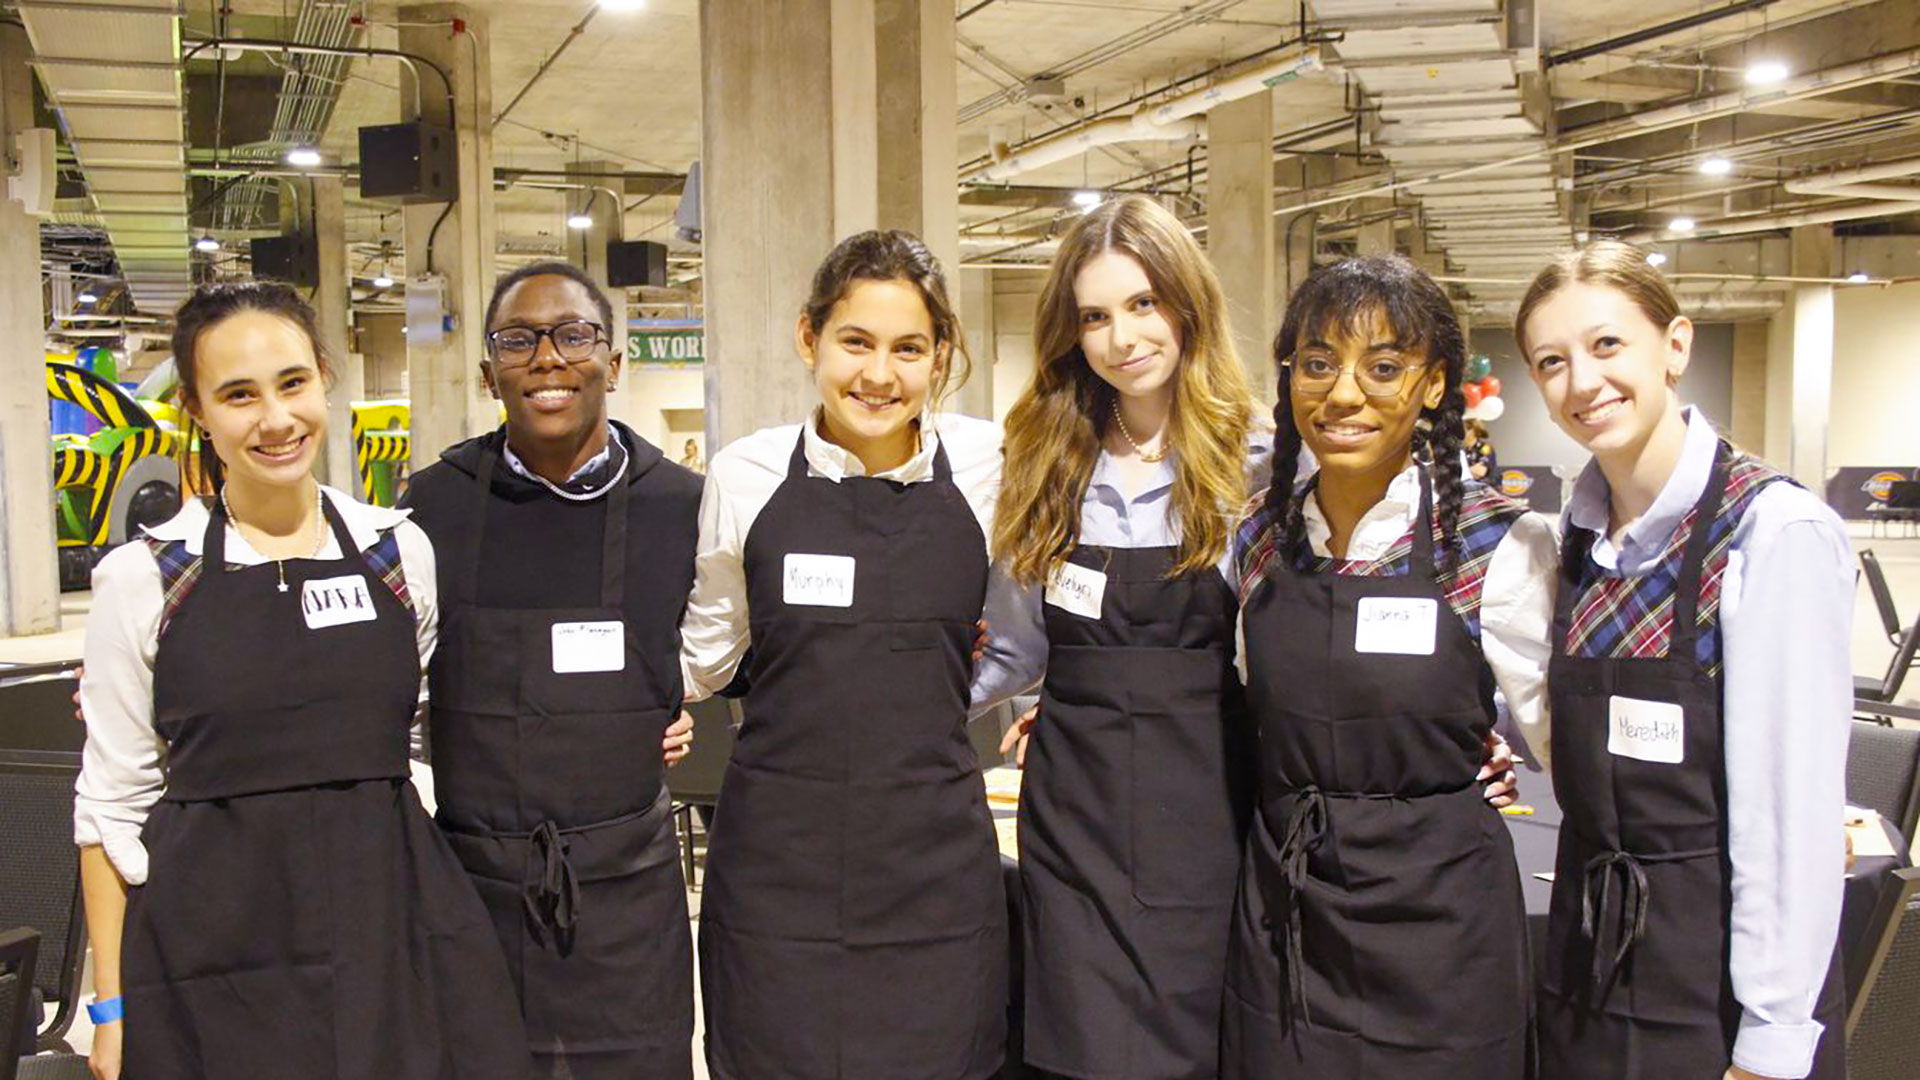 The Class of 2025 served at the Fort Worth Feast of Sharing event.